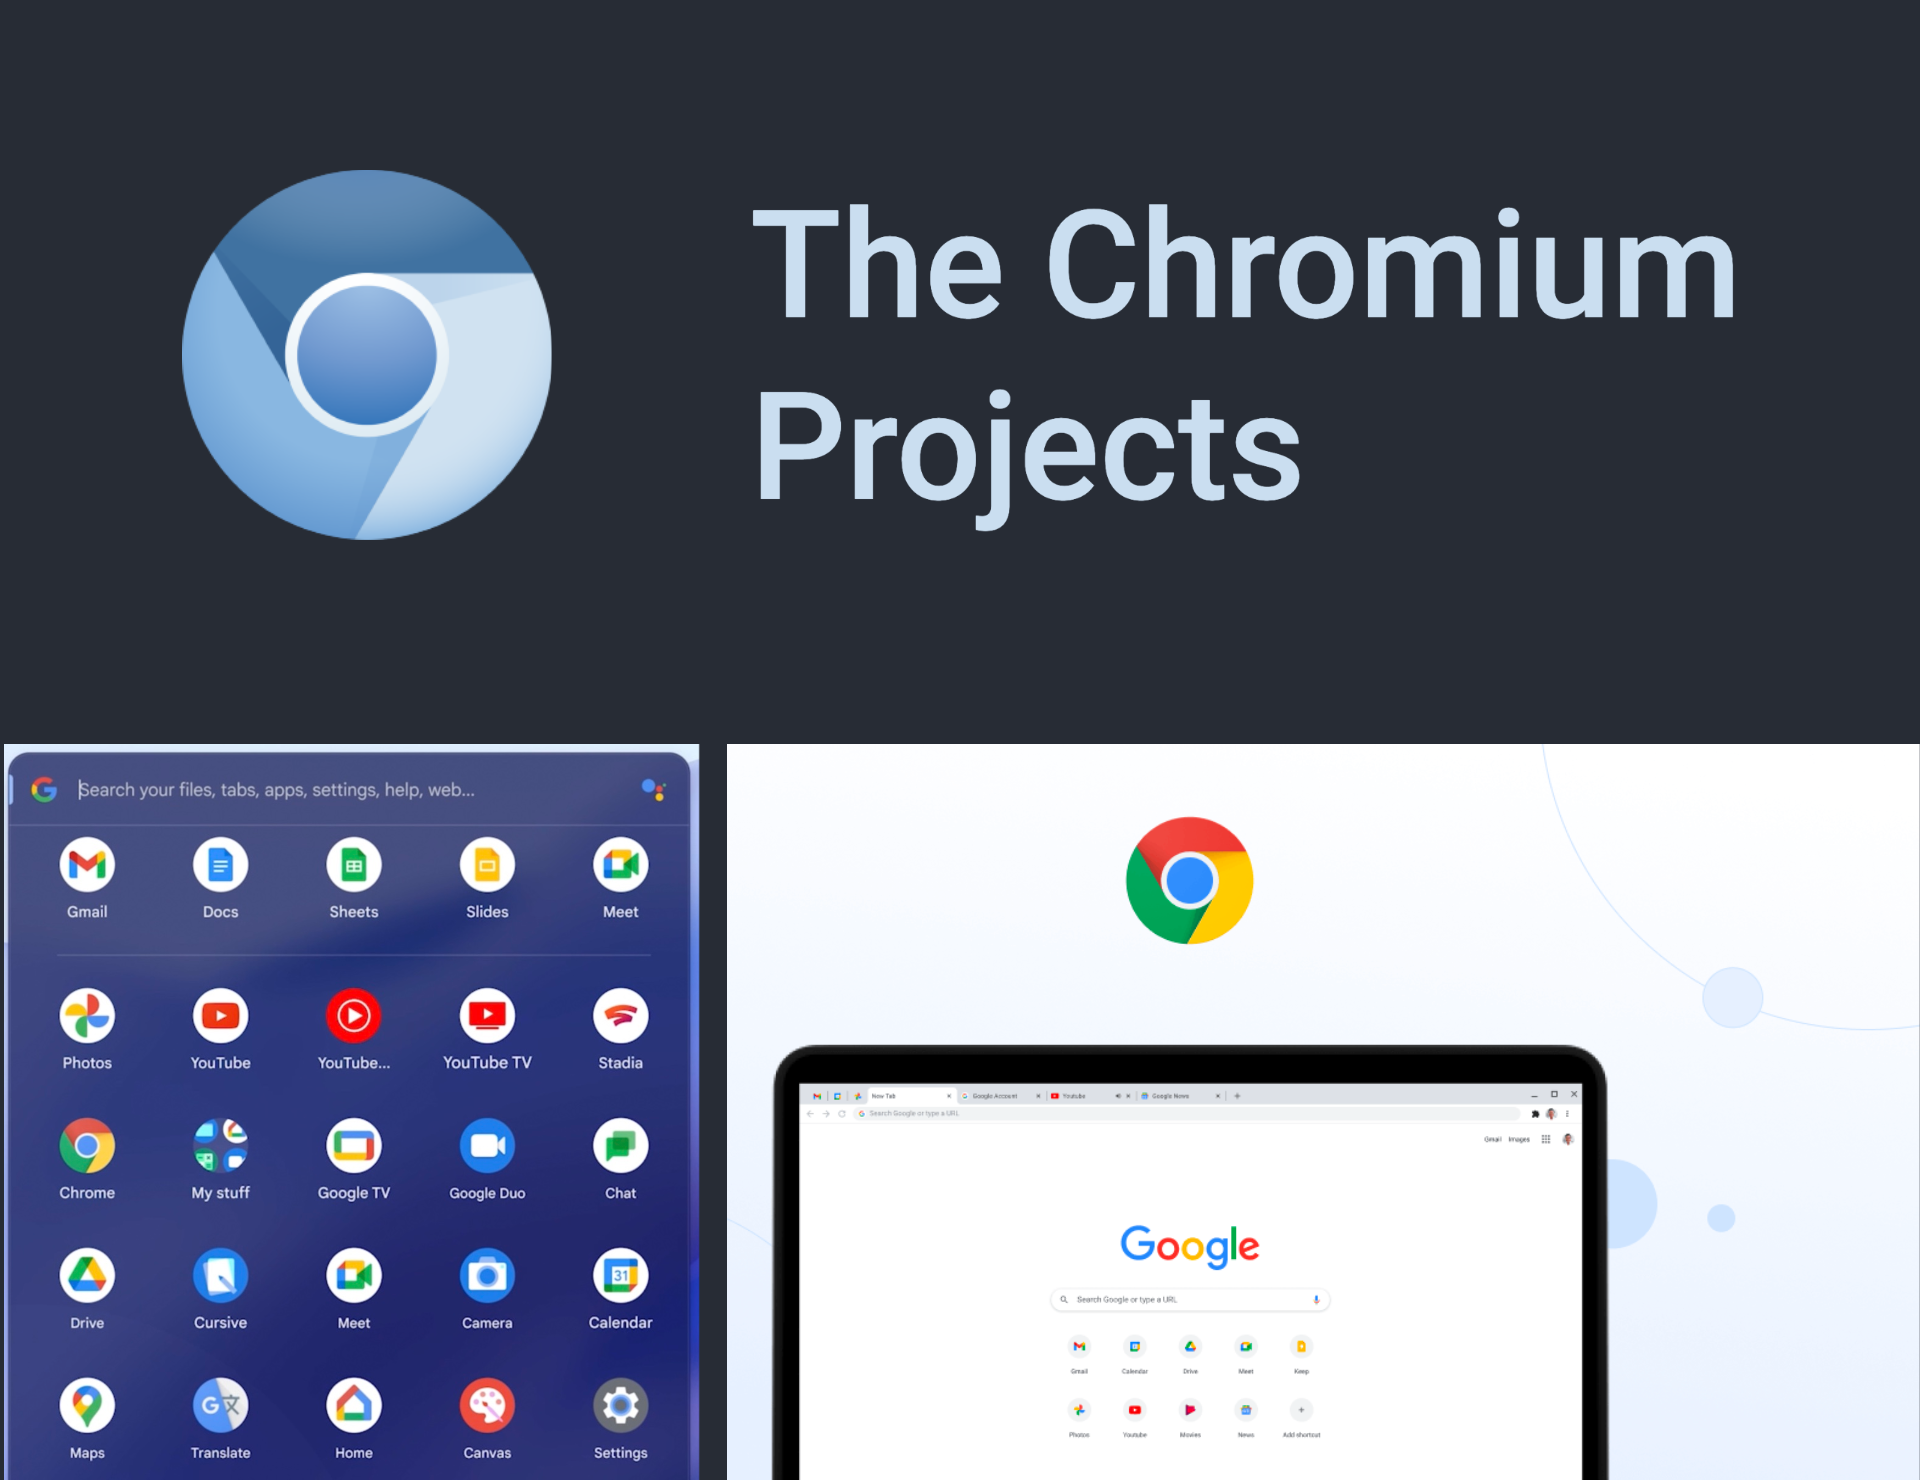 What is The Chromium Projects